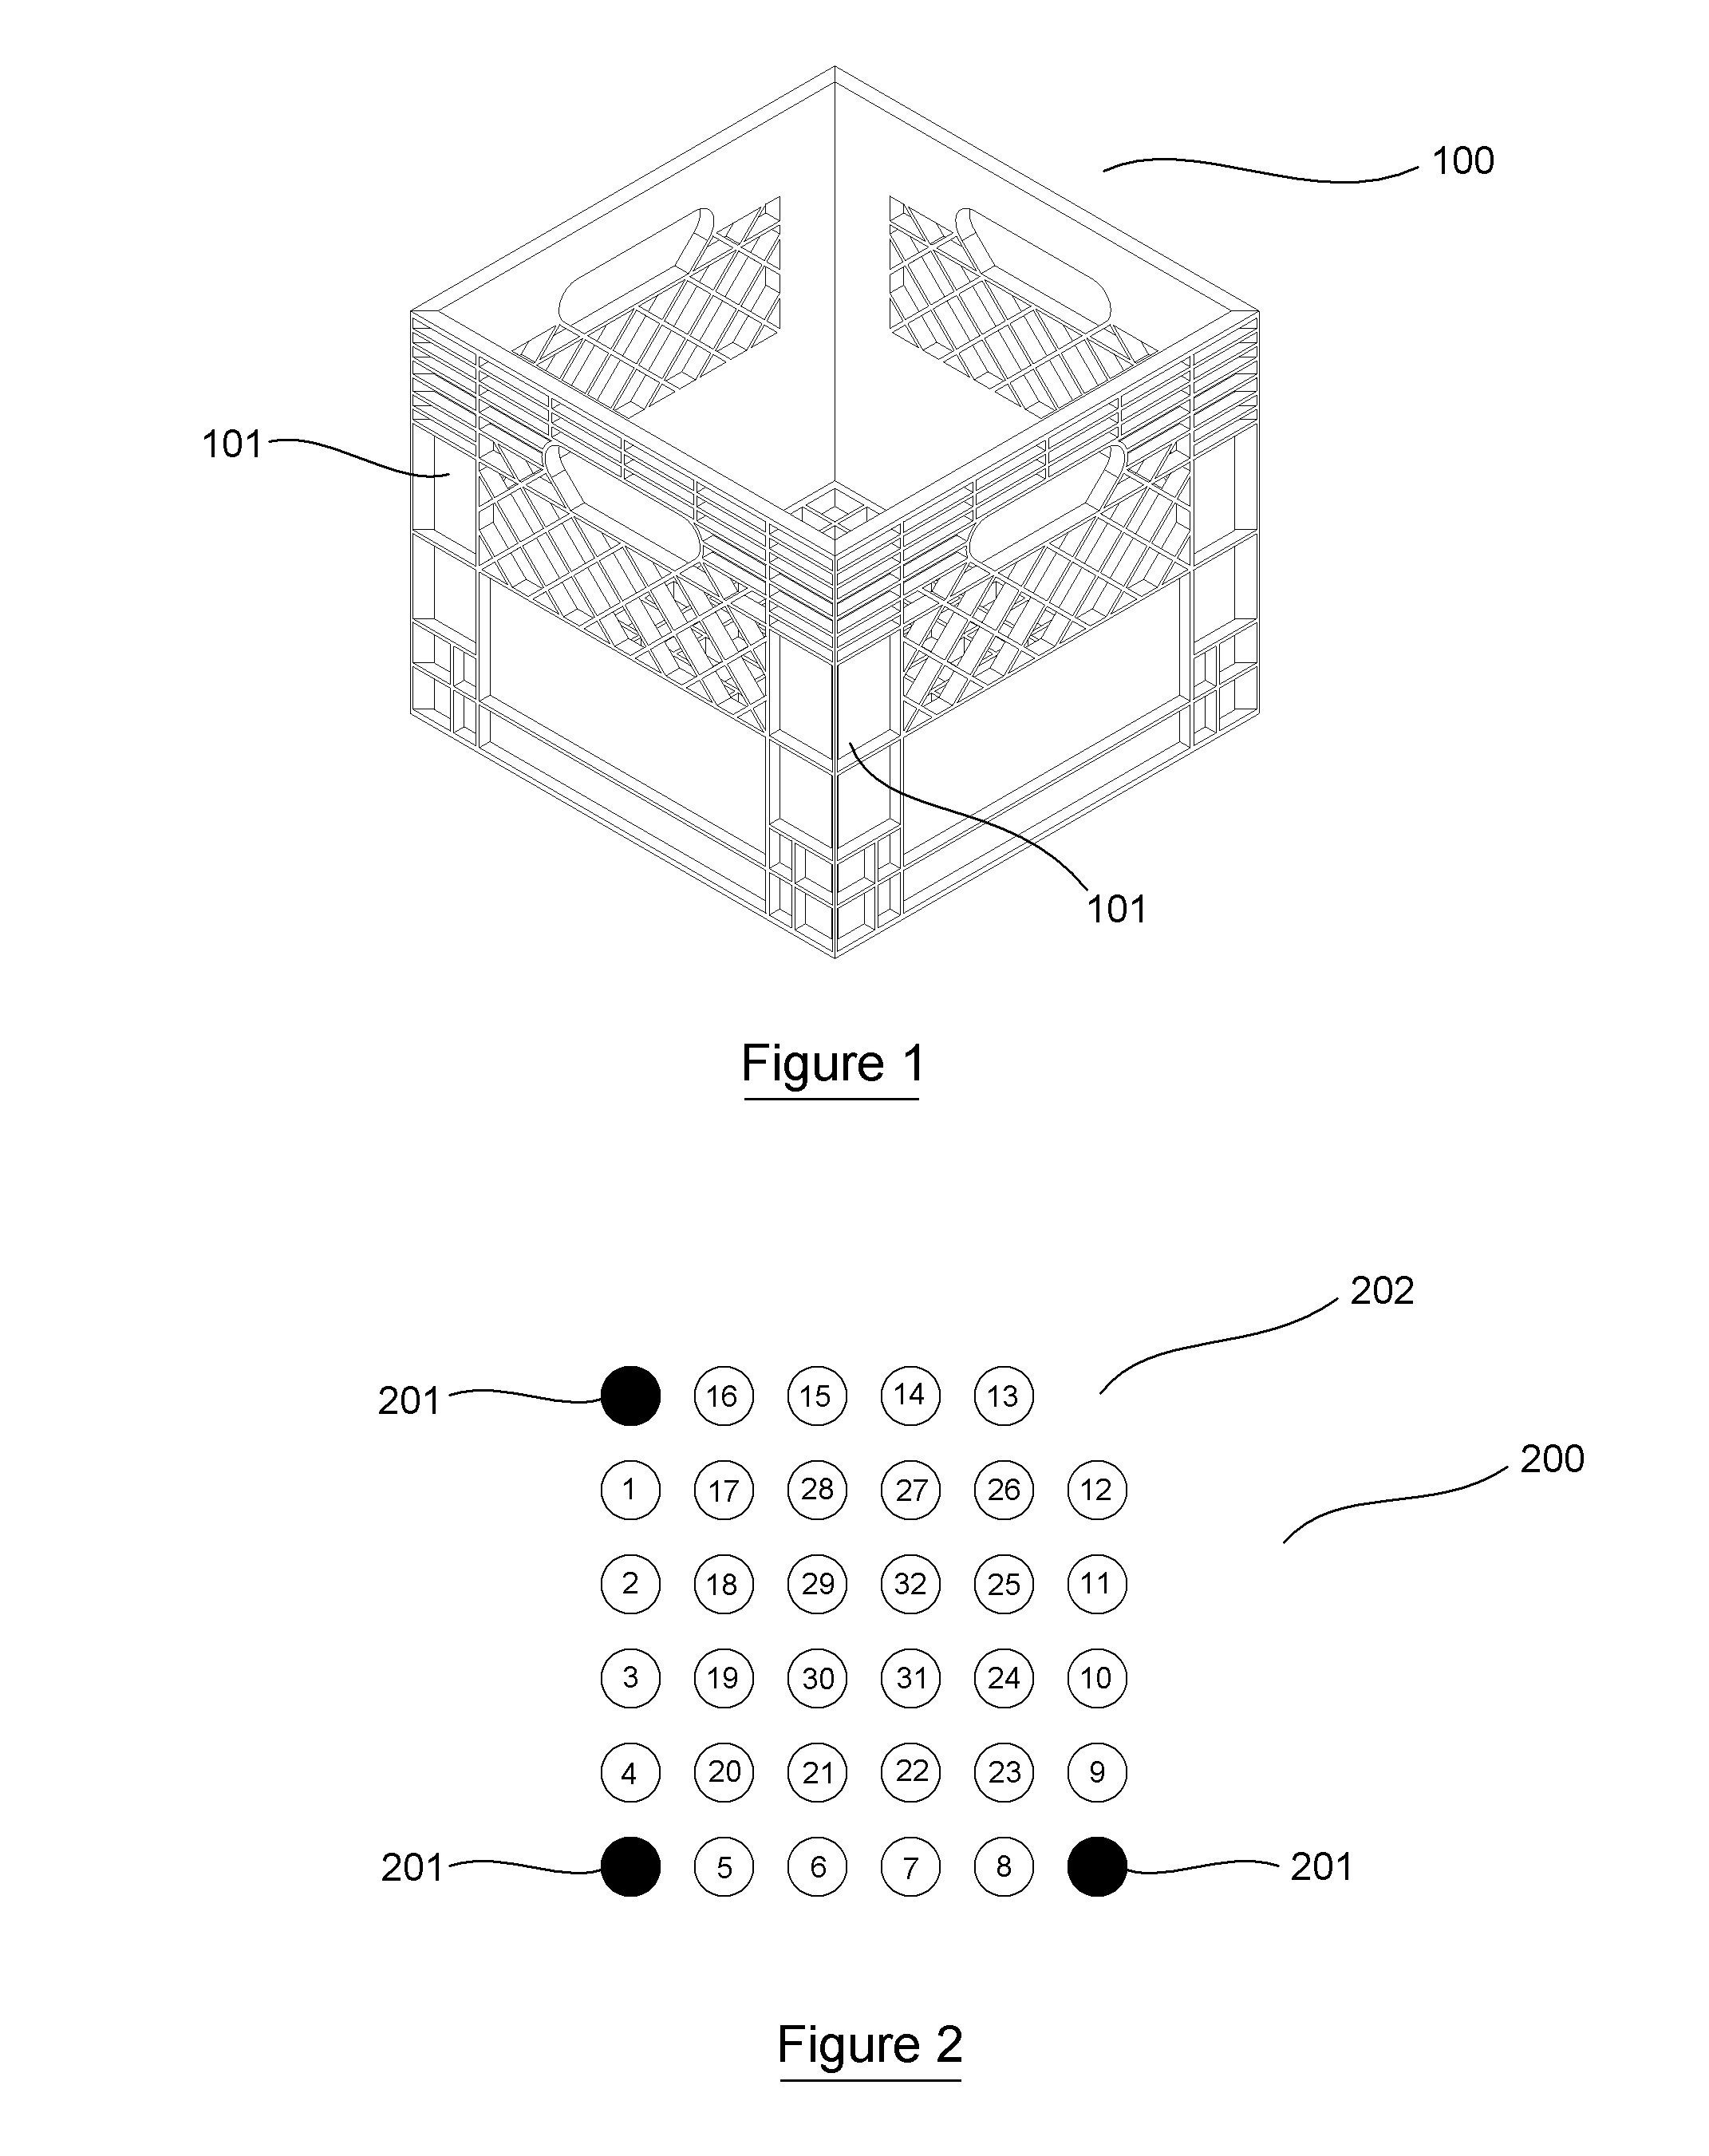 Method and system for identifying and tracking reusable packing crates